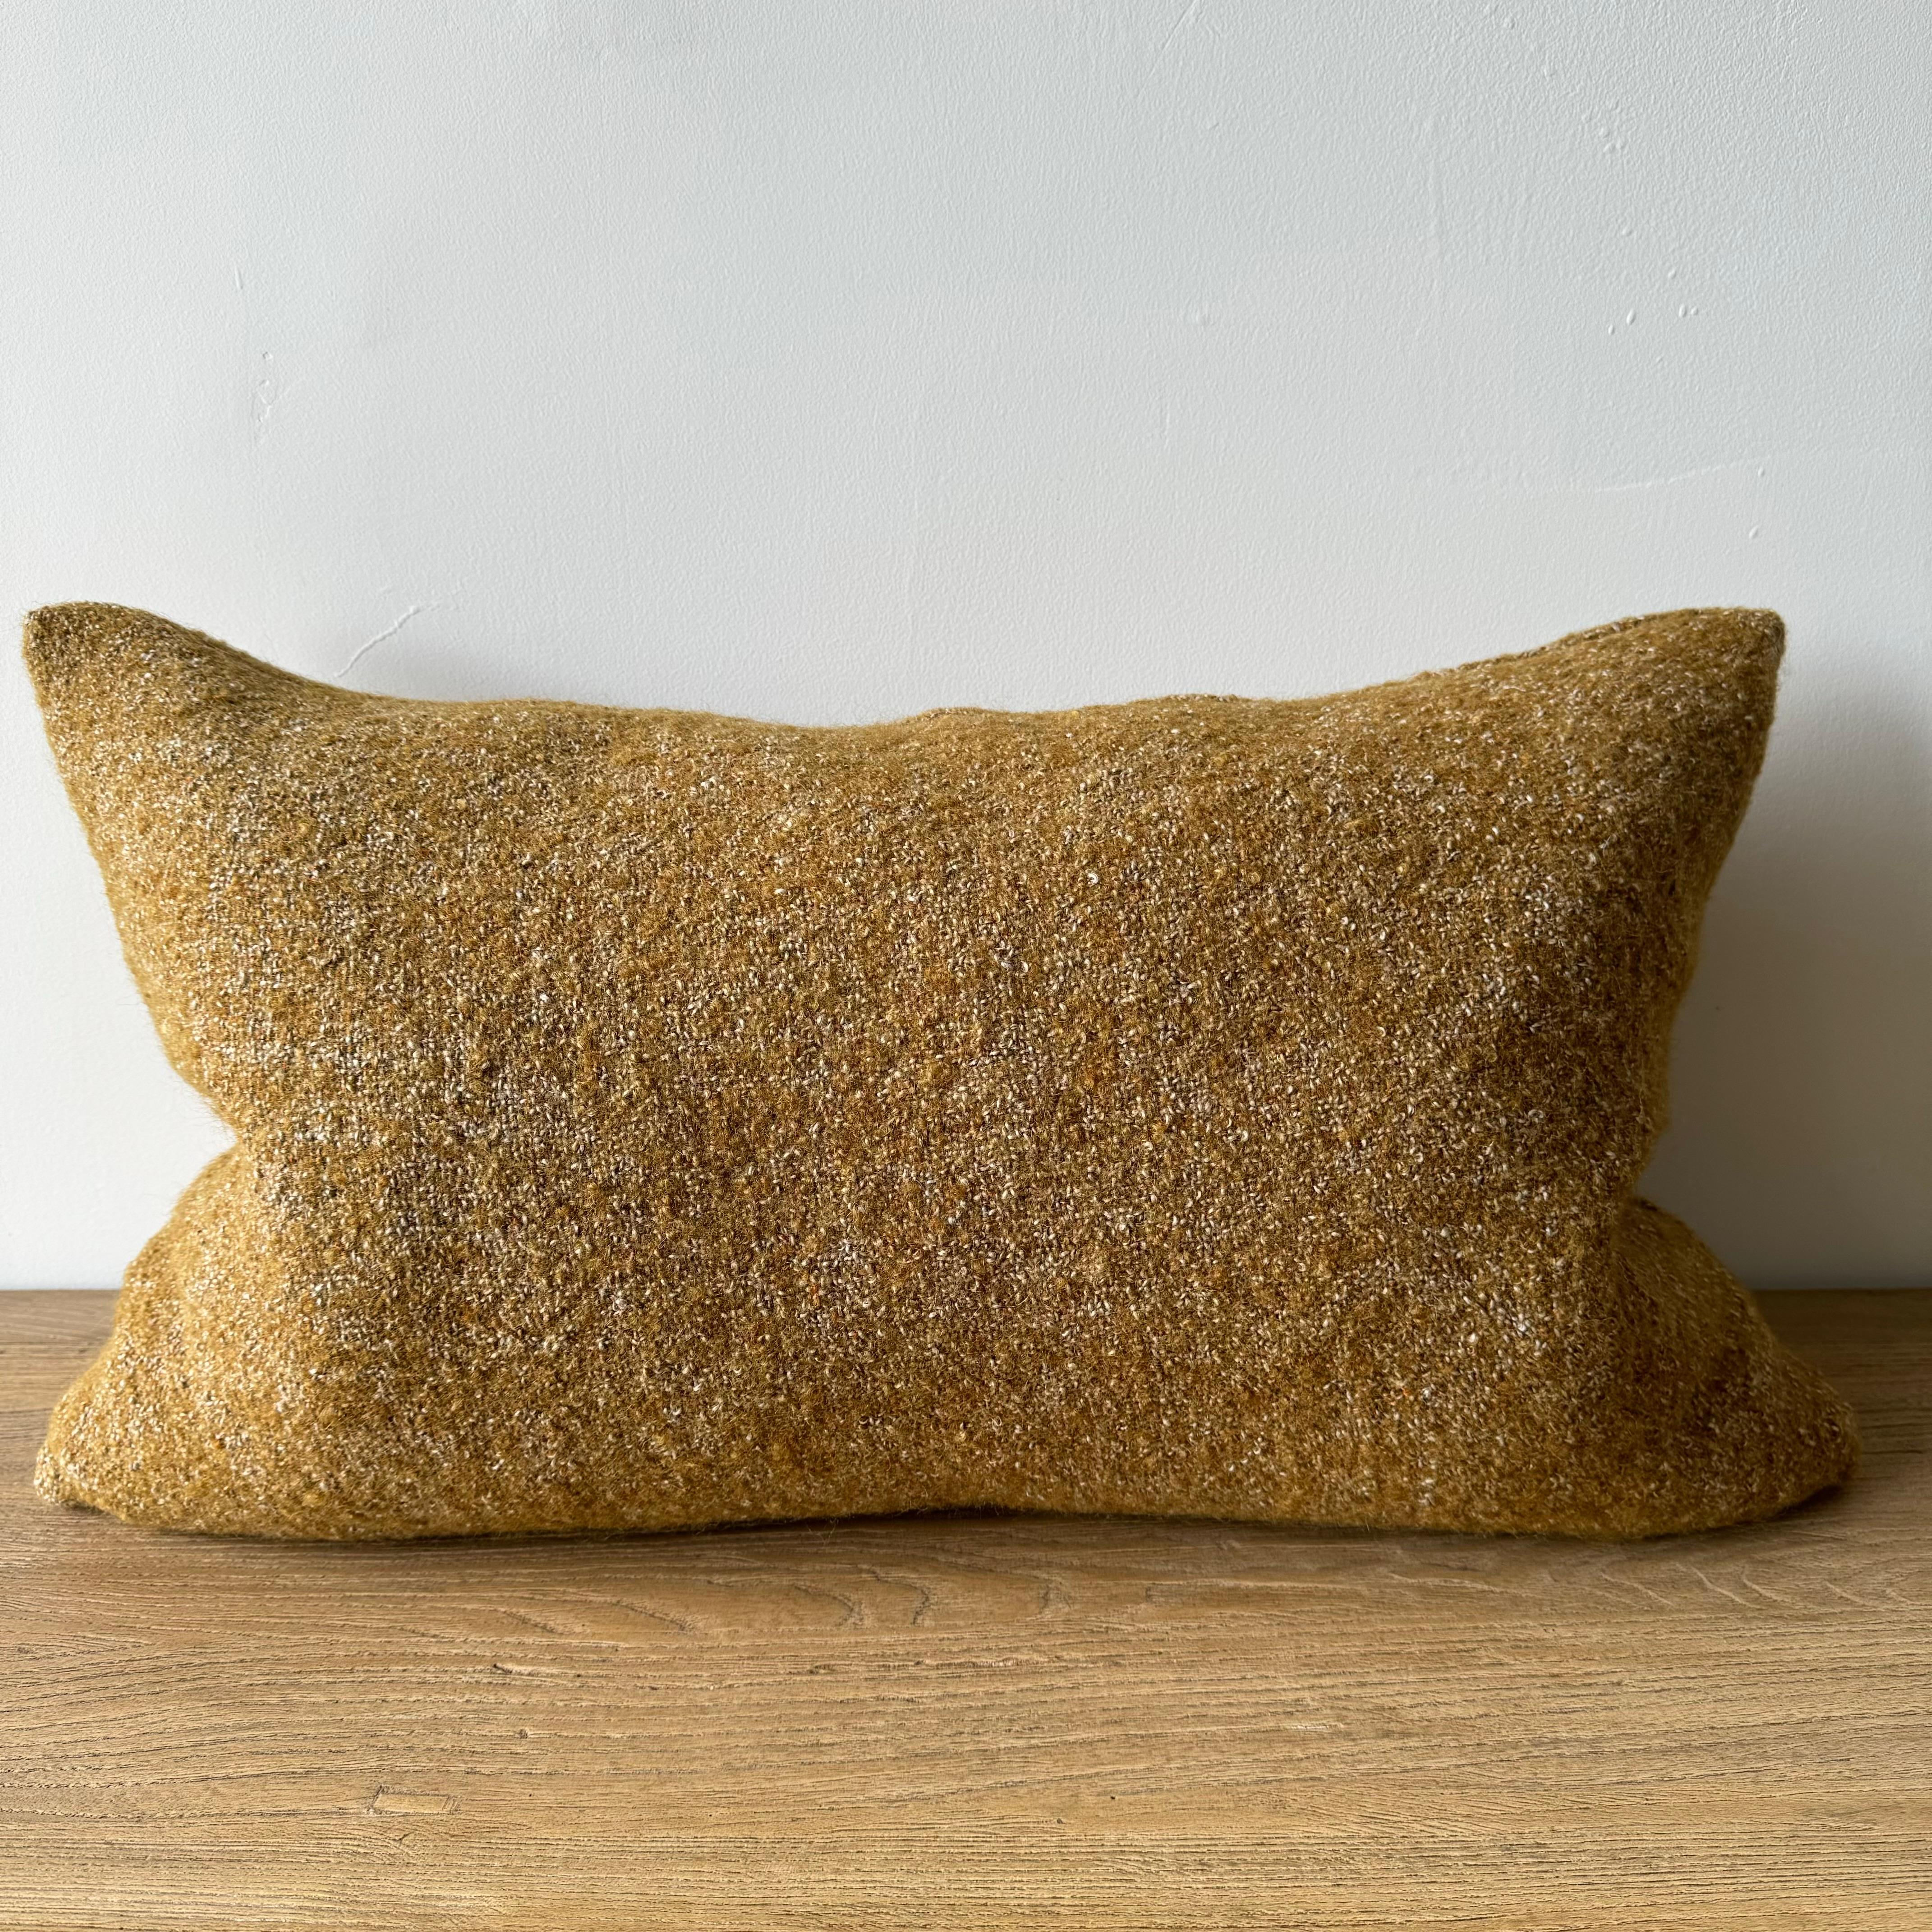 A rich rusty terracotta and natural flax oatmeal woven fibers in a stonewash finish create this luxurious soft pillow. Sewn with an antique brass zipper closure and overlocked edges.
Includes a down/ feather insert.
Size: 15